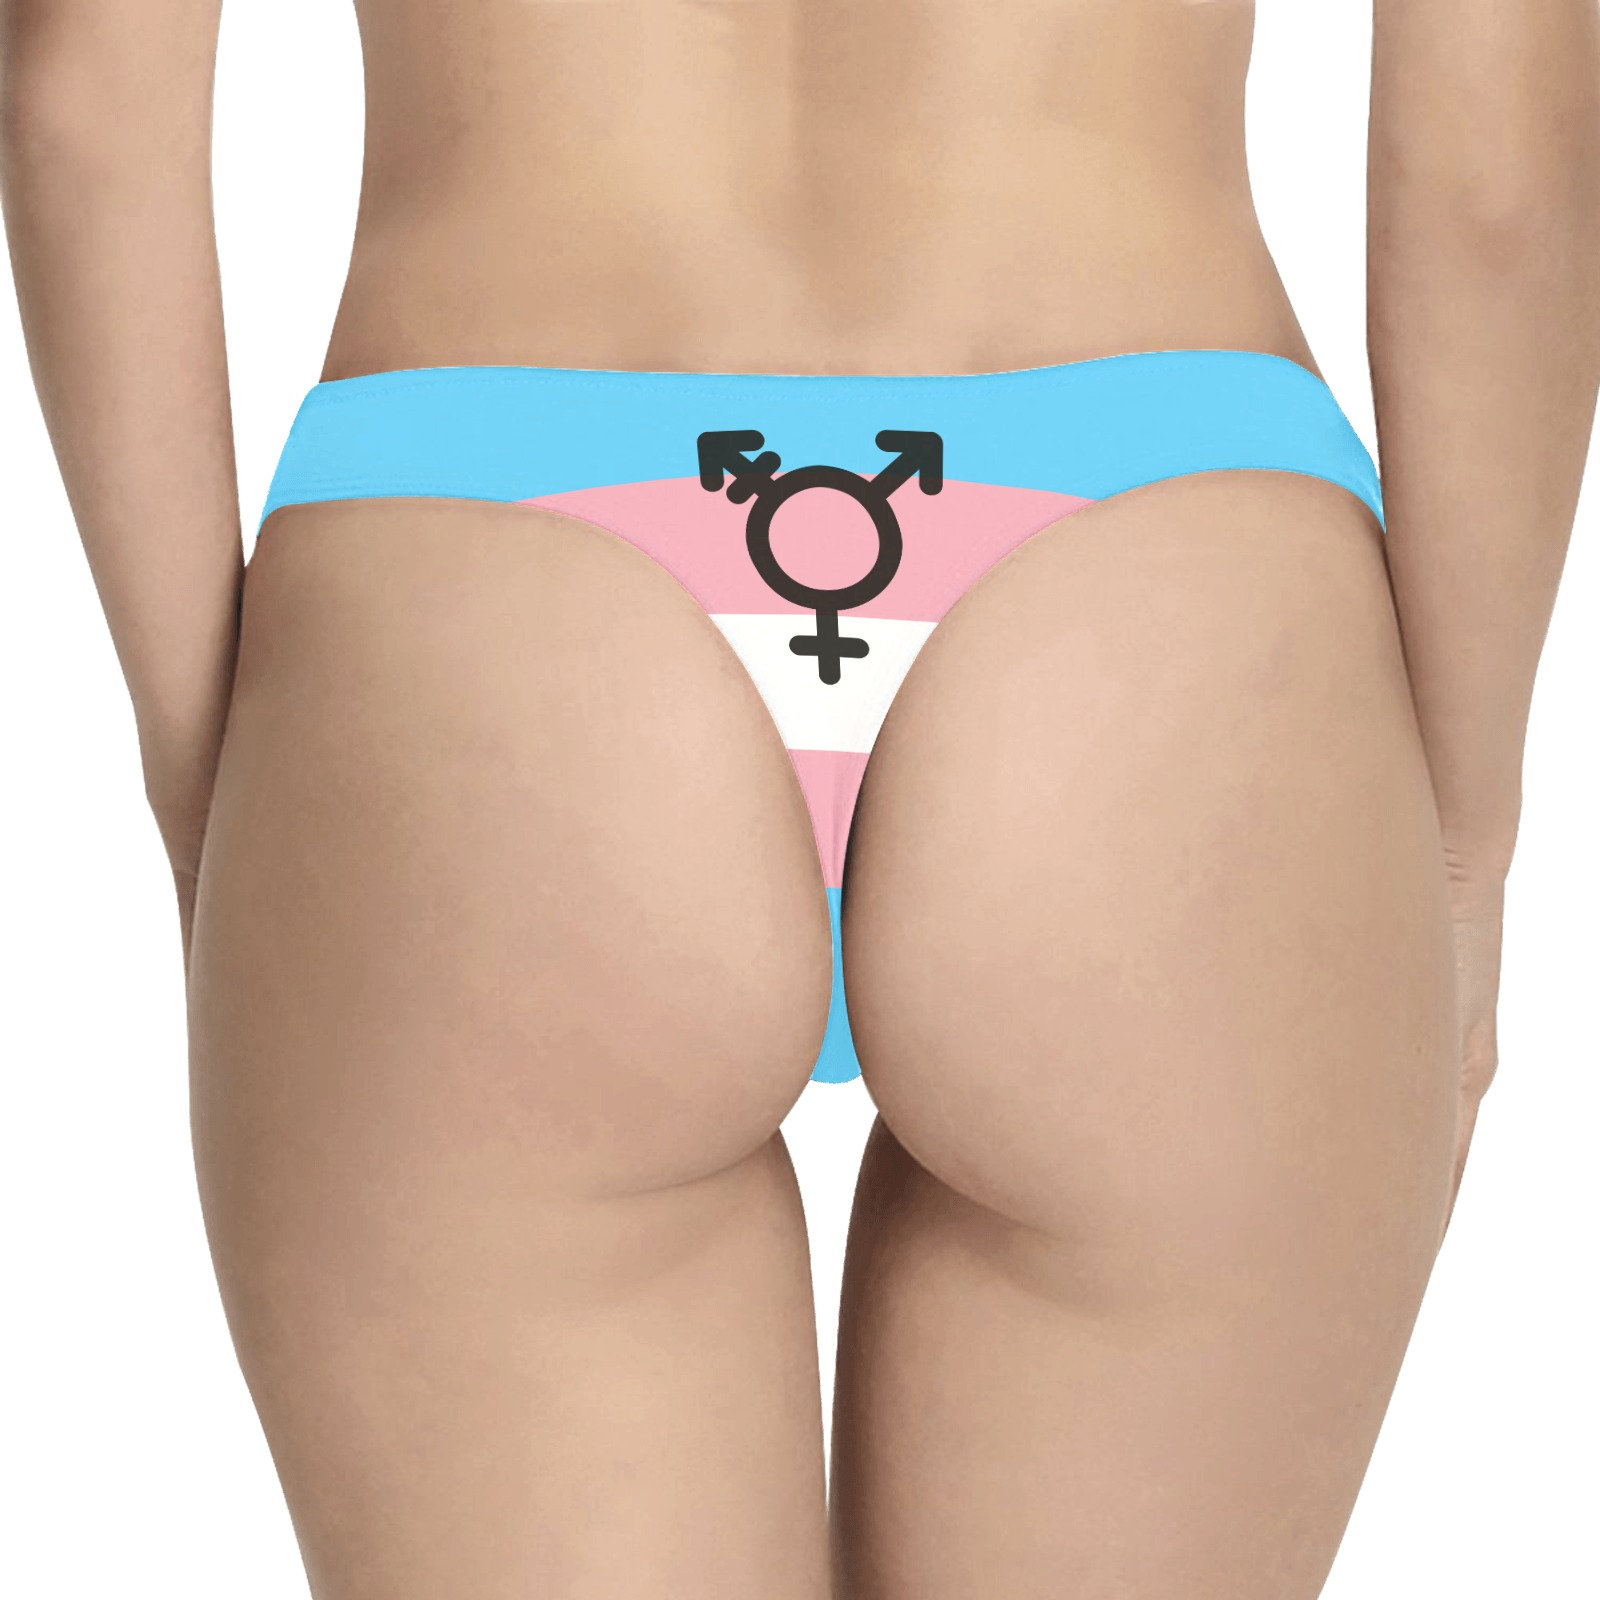 Gaff Panty for Crossdressing Men and Trans-women. RED Thong Back